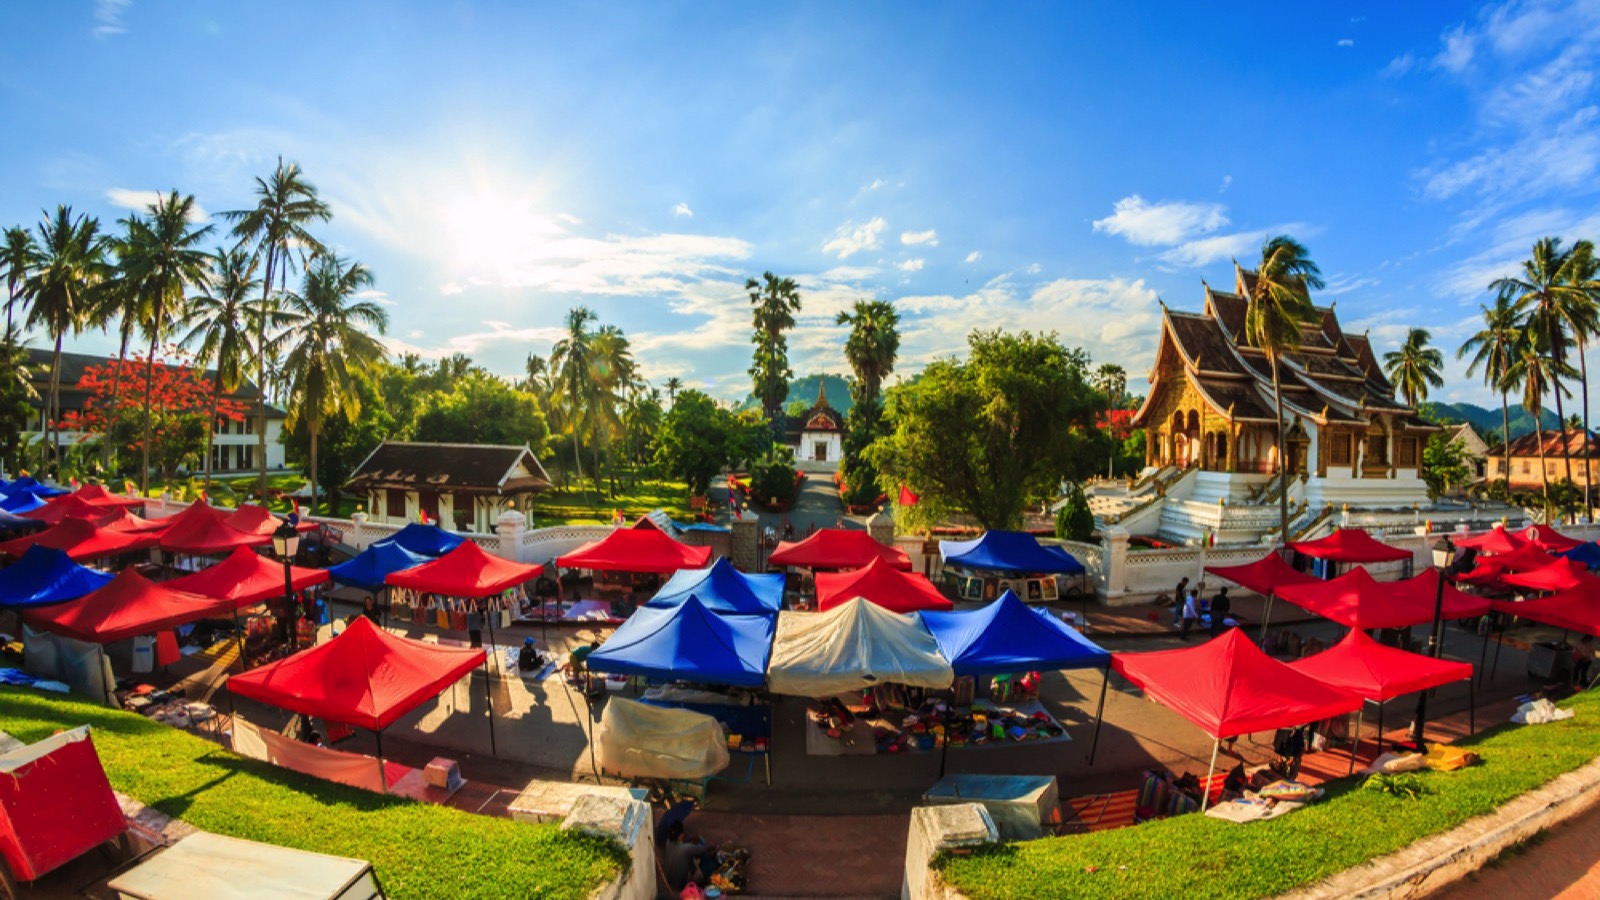 <p>A Unesco World Heritage town, travelers tip Laun as a tranquil haven that blends well-preserved Buddhist temples with enthralling colonial French architecture. "Laos is an earthly paradise, save for its chaotic and unreliable transportation," a <a href="https://www.reddit.com/r/travel/comments/vuvwa/what_are_the_most_underover_rated_places_in_south/">traveler</a> cautions.</p>